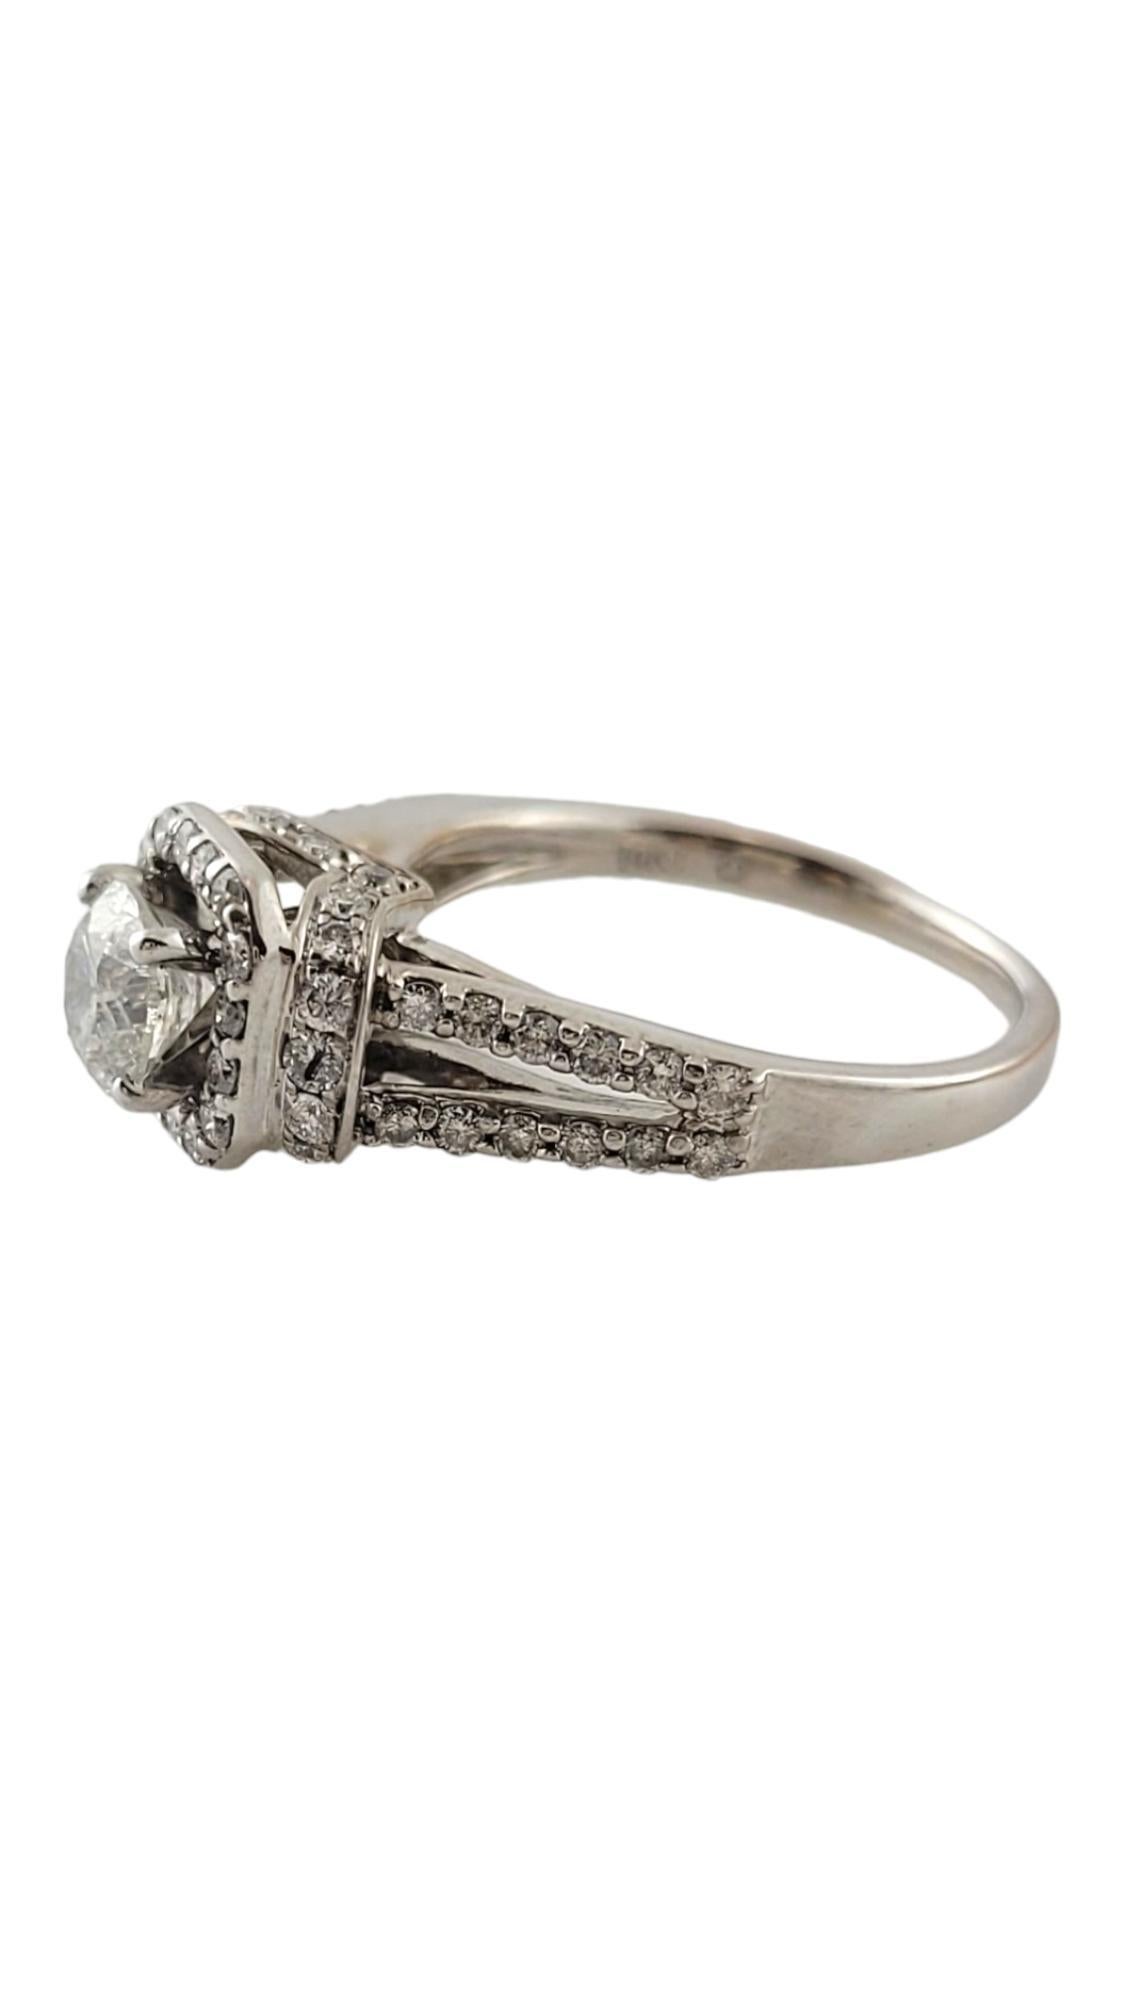 This sparkling ring features one round brilliant cut diamond (.70 ct.) surrounded by 60 round brilliant cut diamonds on the halo and band.  Shank:  1.5 mm.

Approximate total diamond weight:  1.12 ct.

Diamond color: G-H

Diamond clarity: